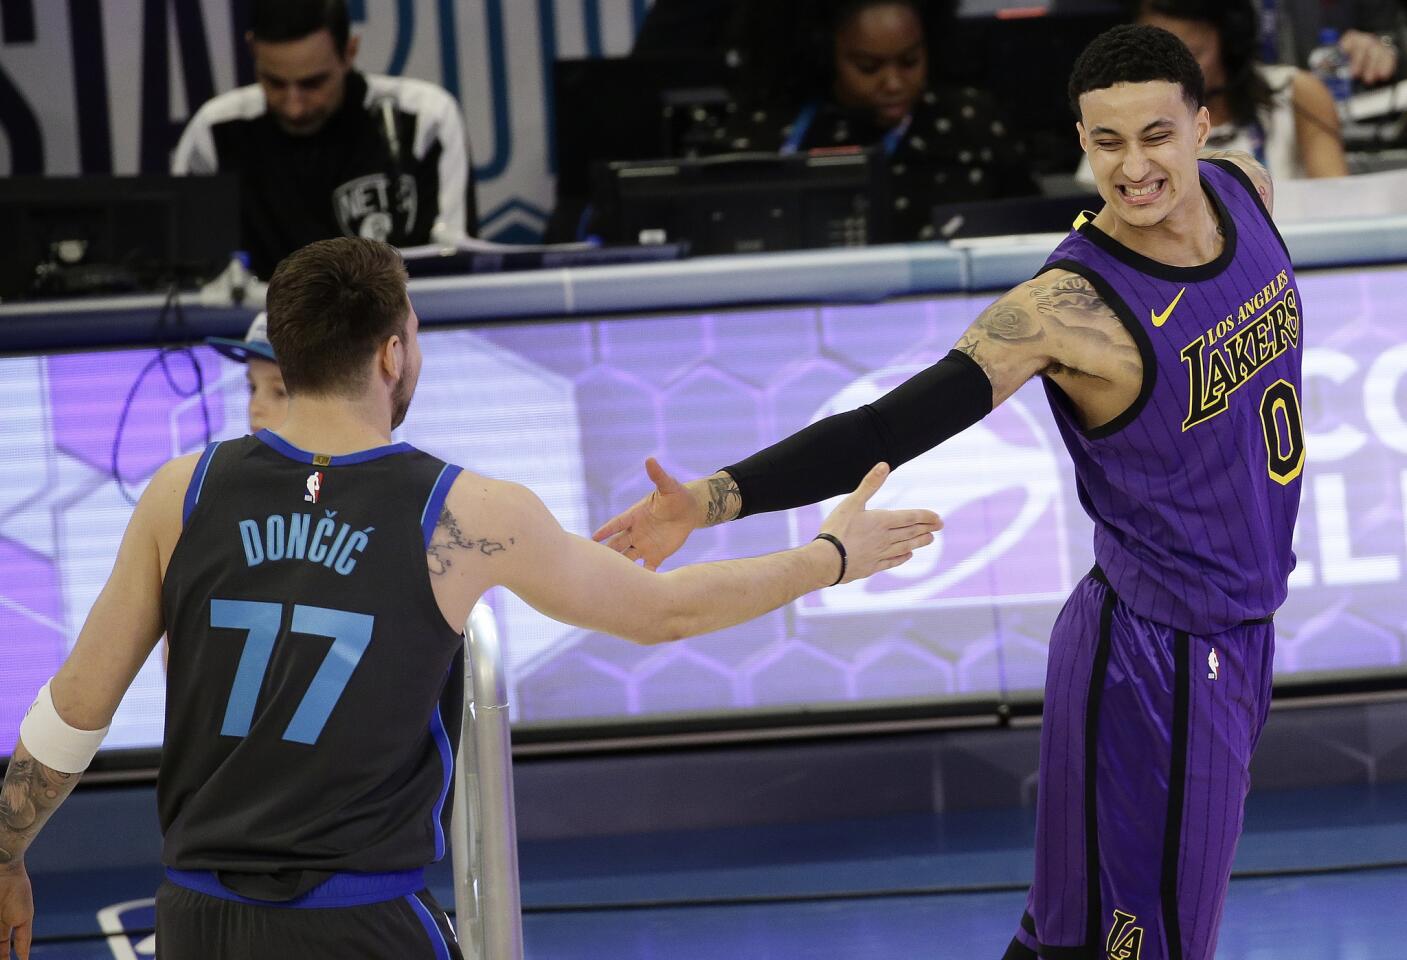 Lakers Kyle Kuzma congratulates Mavericks forward Luka Doncic after losing in the first round of the skills competition.